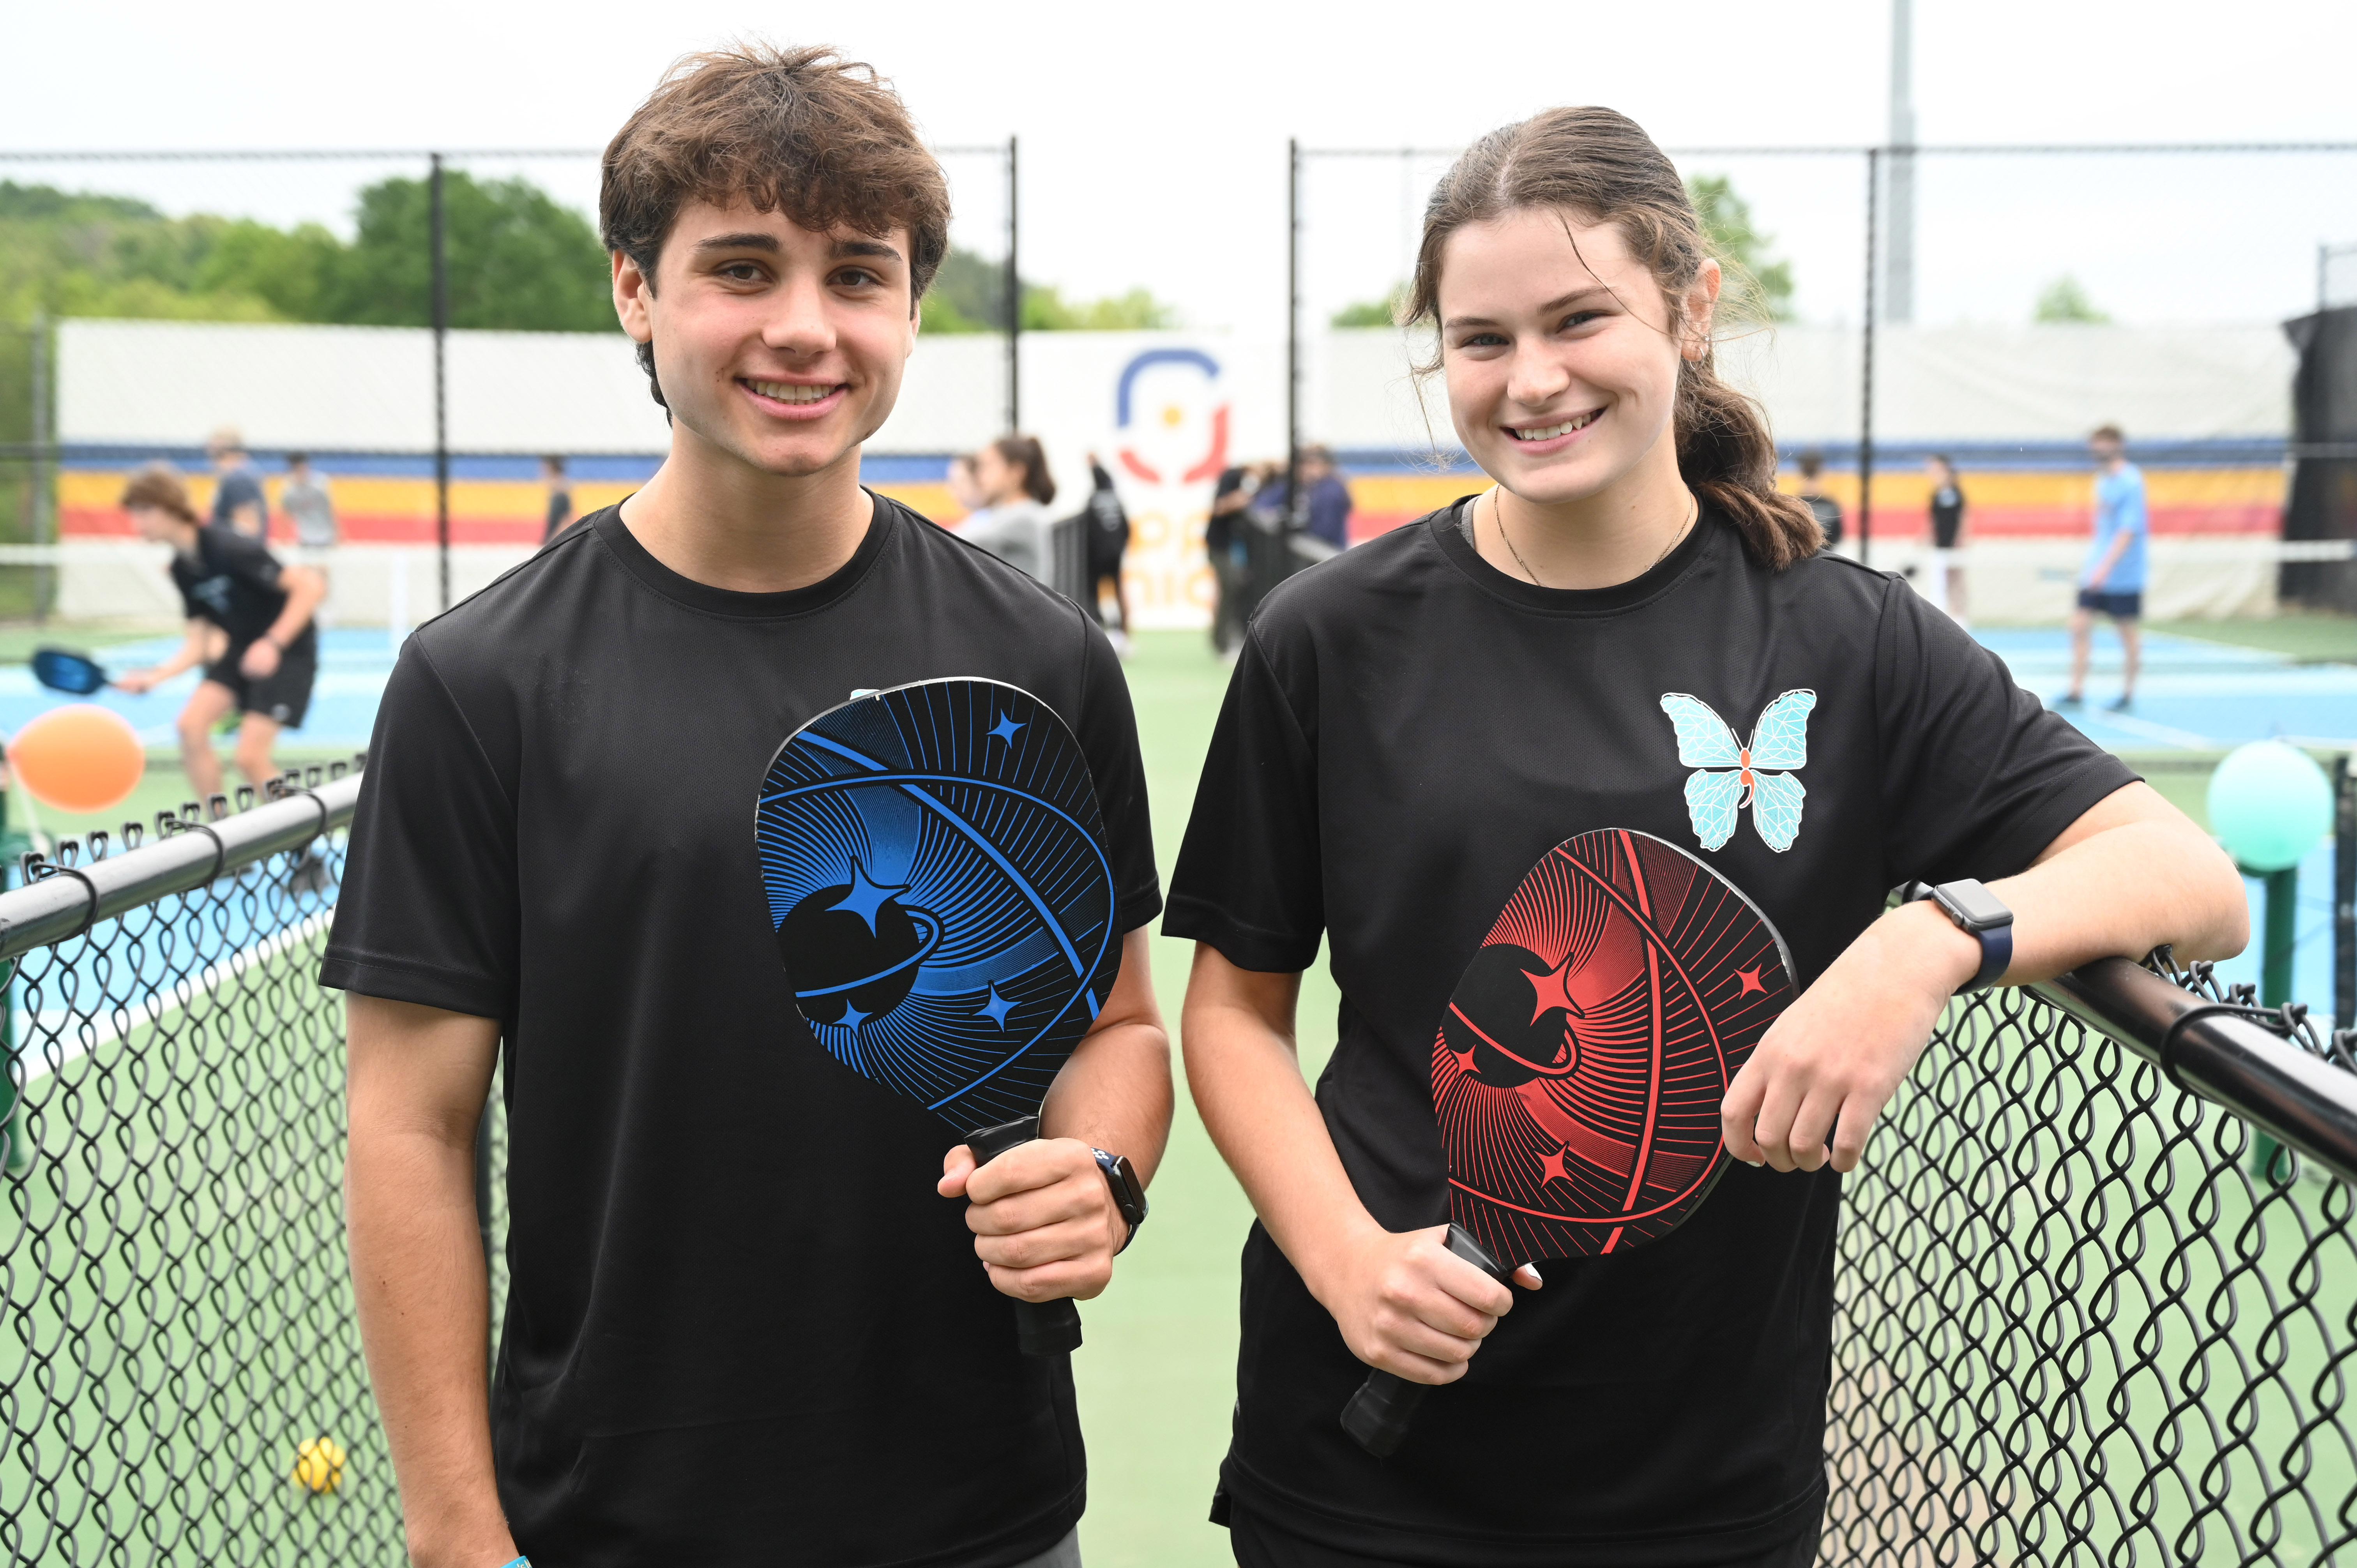 Manchester Valley High School juniors Brady Bonney and Leigh Hoke are seen during the pickleball tournament they organized at Coppermine 4 Seasons, in support of Morgan's Message, a non-profit supporting student-athlete mental health initiatives. (Brian Krista/staff photo)